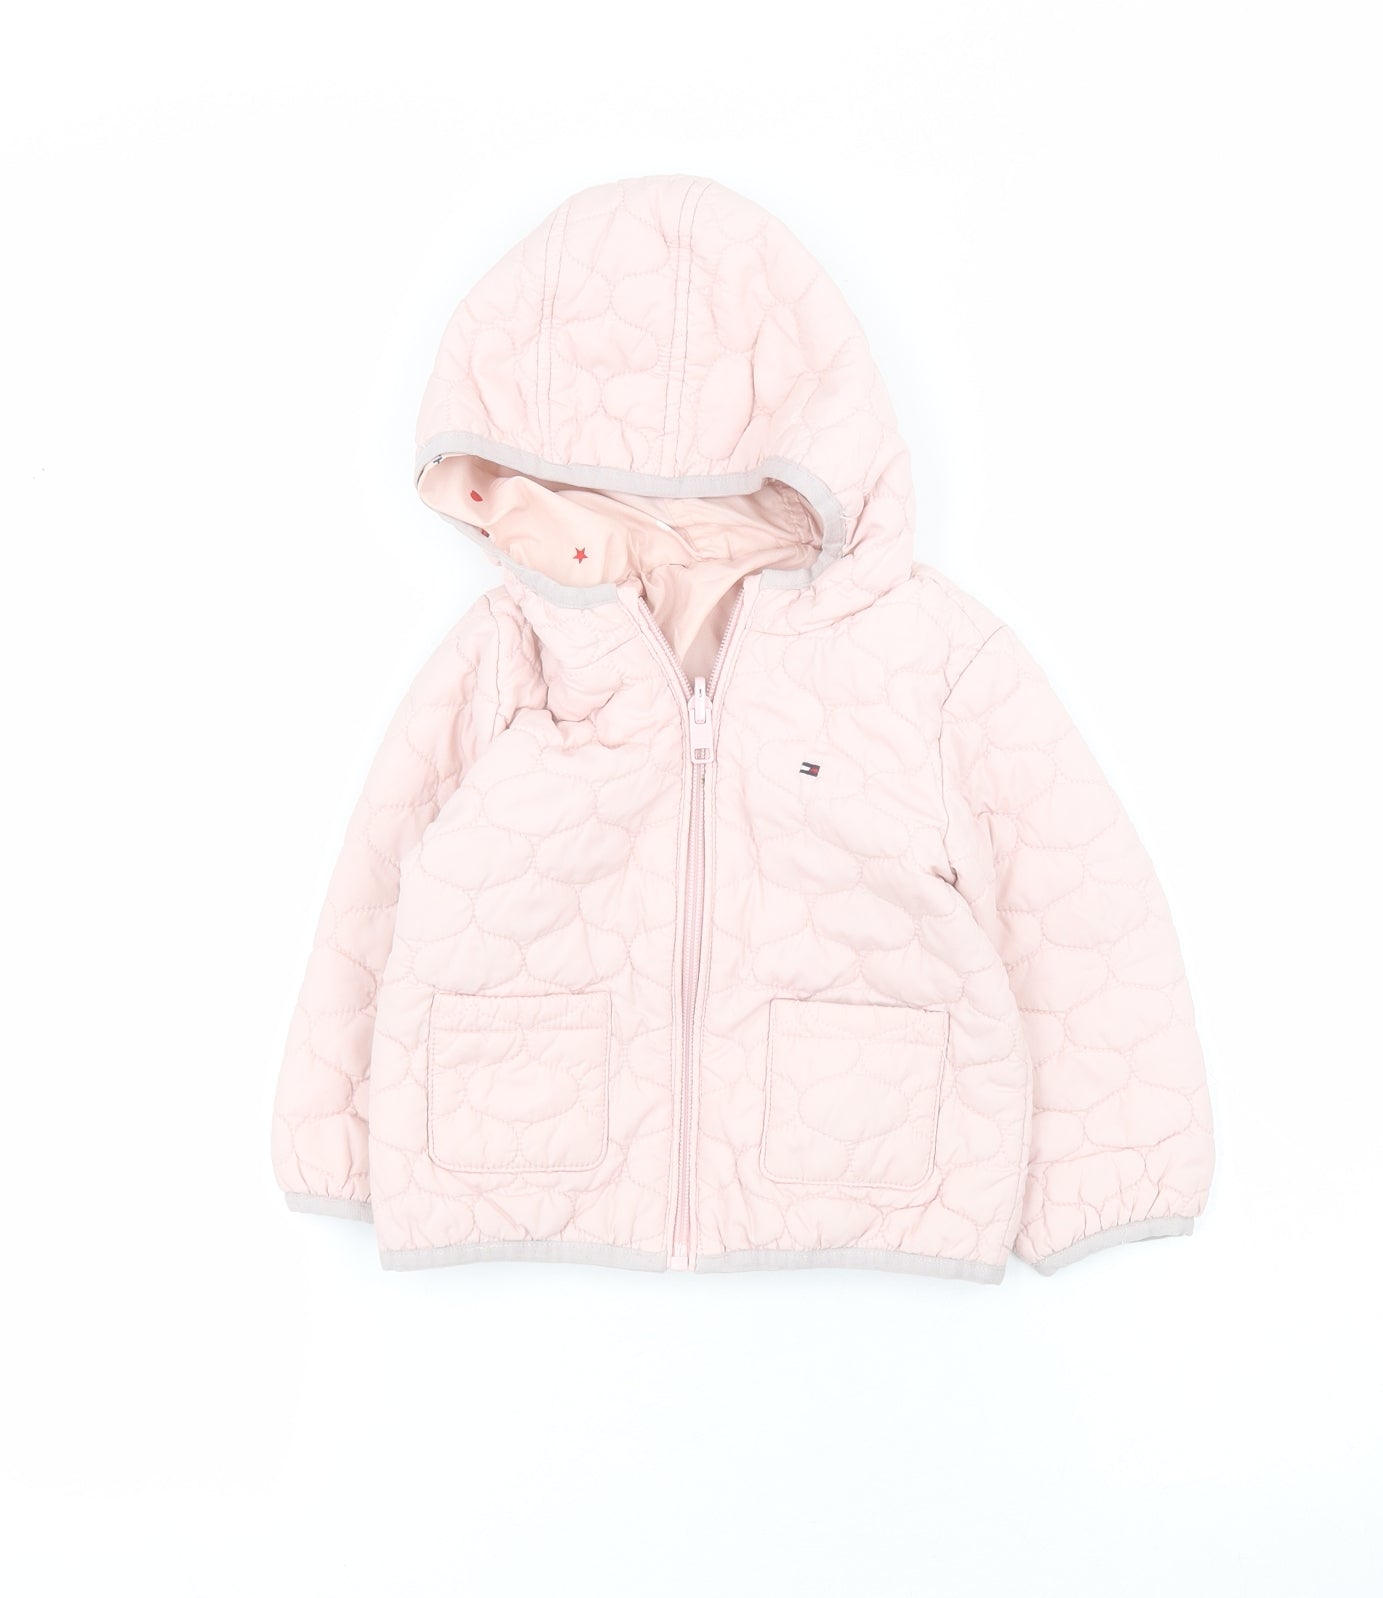 pence porter Arving Tommy Hilfiger Baby Pink Quilted Coat Size 9-12 Months Zip – Preworn Ltd